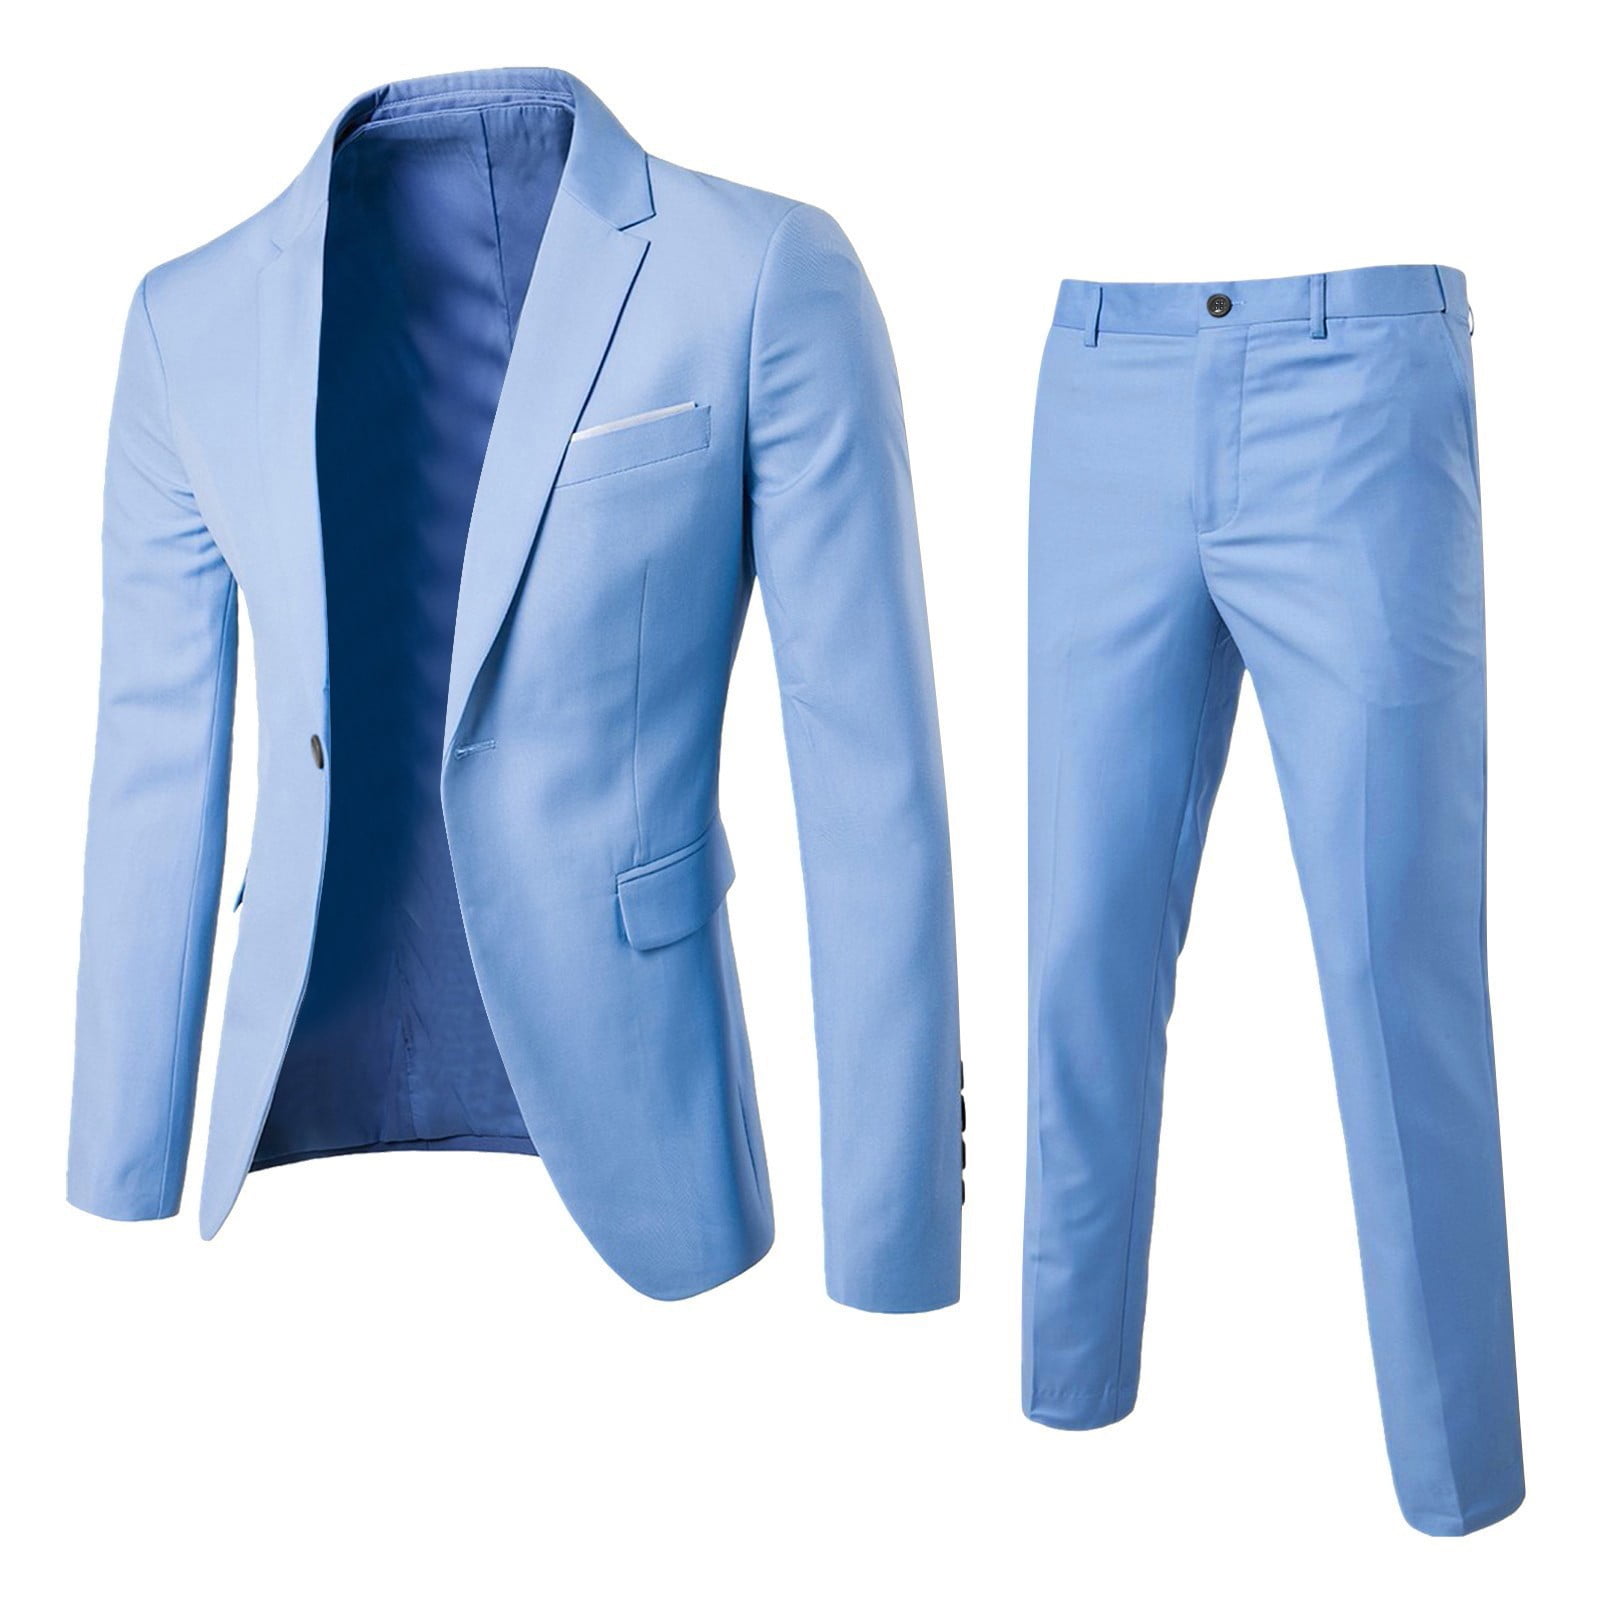 Light Blue Two Piece Formal Pants Suit With Long Sleeves, Blazer, And  Trouser For Formal Office And Business Wear From Armelia, $73.93